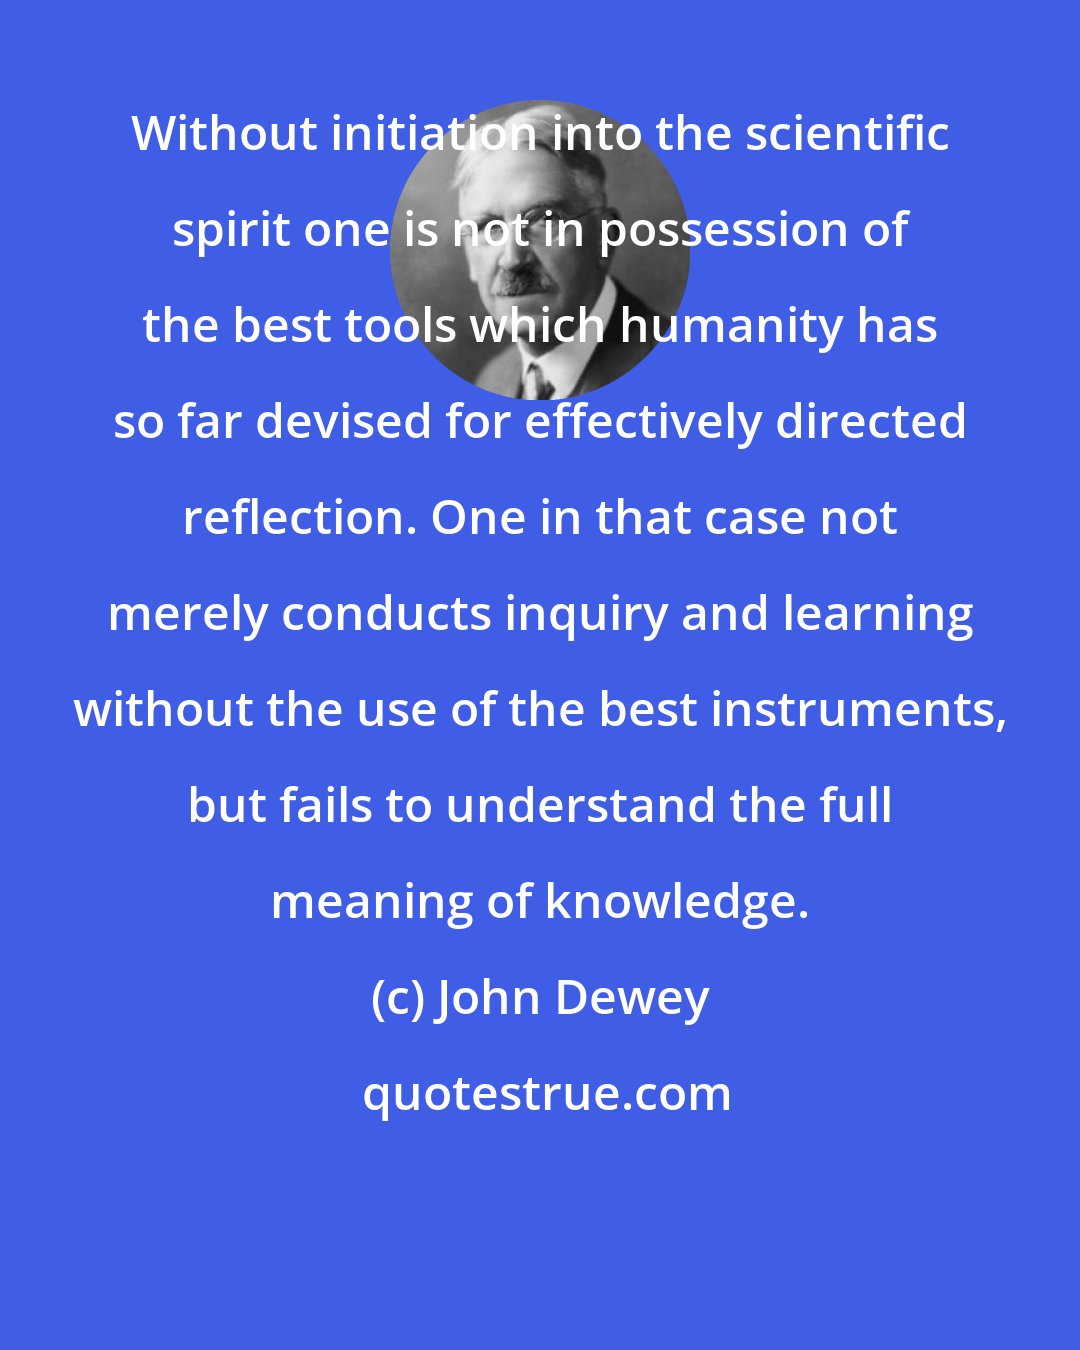 John Dewey: Without initiation into the scientific spirit one is not in possession of the best tools which humanity has so far devised for effectively directed reflection. One in that case not merely conducts inquiry and learning without the use of the best instruments, but fails to understand the full meaning of knowledge.